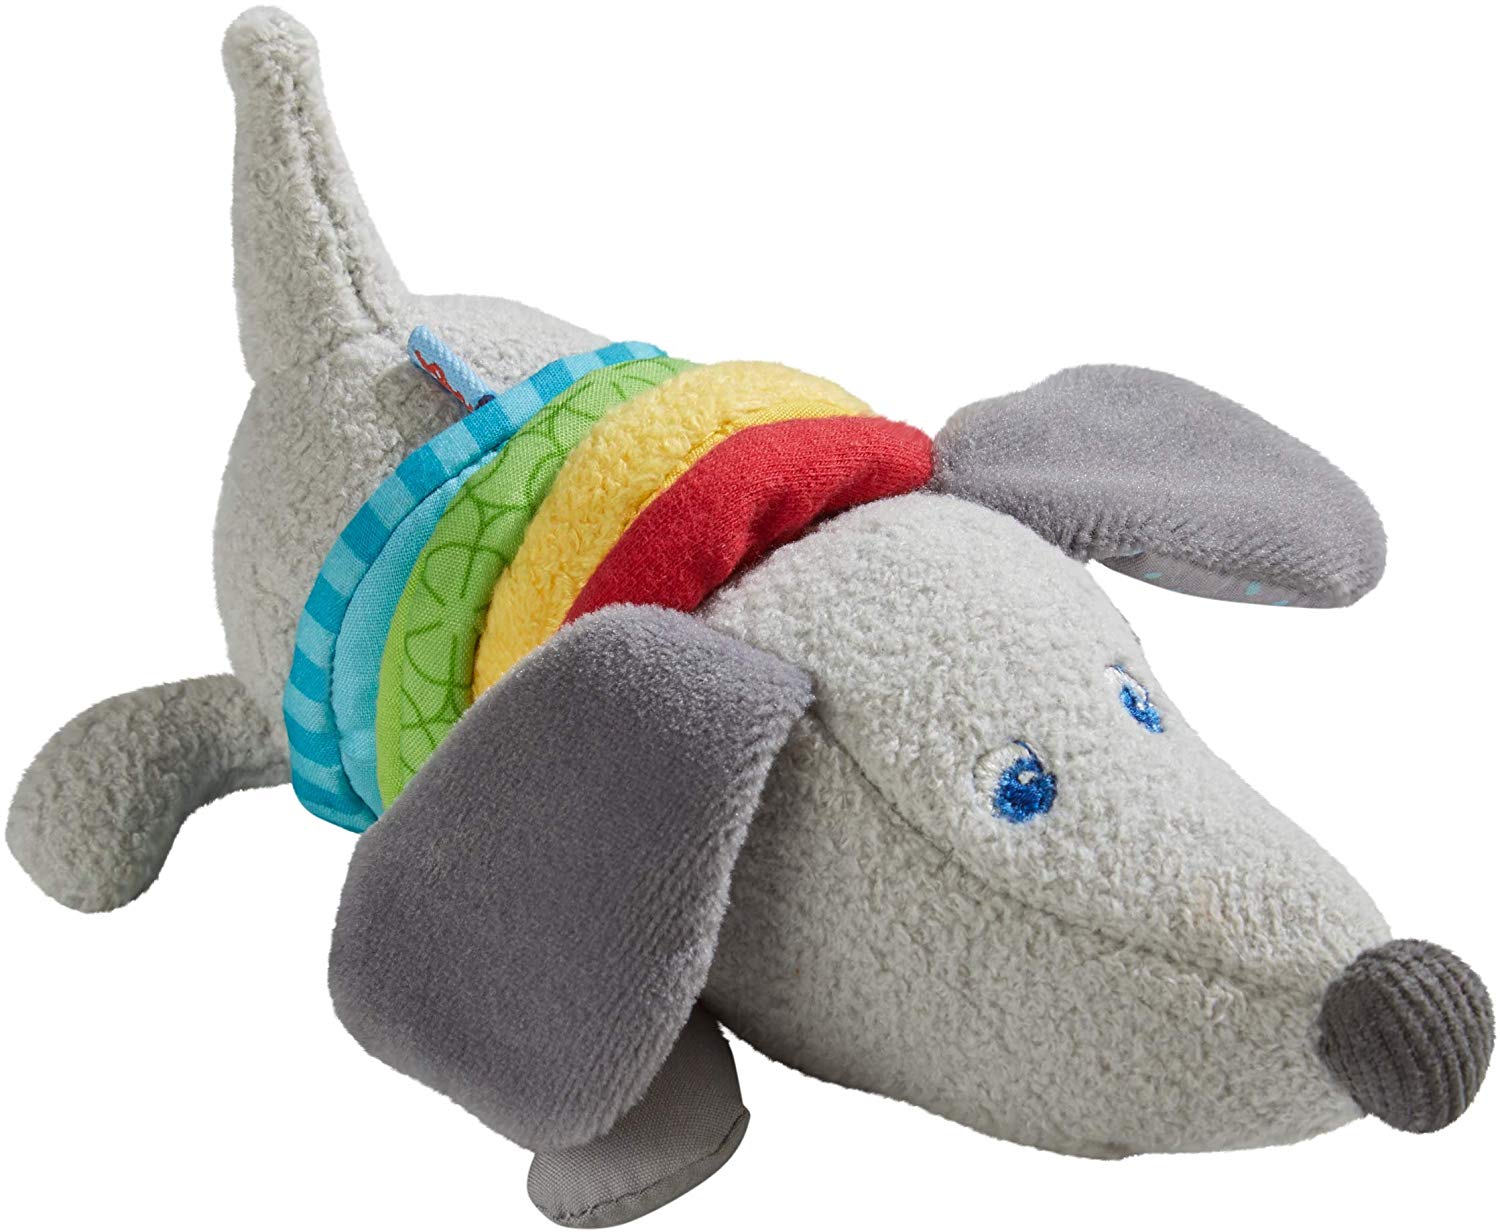 Haba 304771 - Ratter Figurine Dachshund Baby Toy Made From Fabric With Ratt